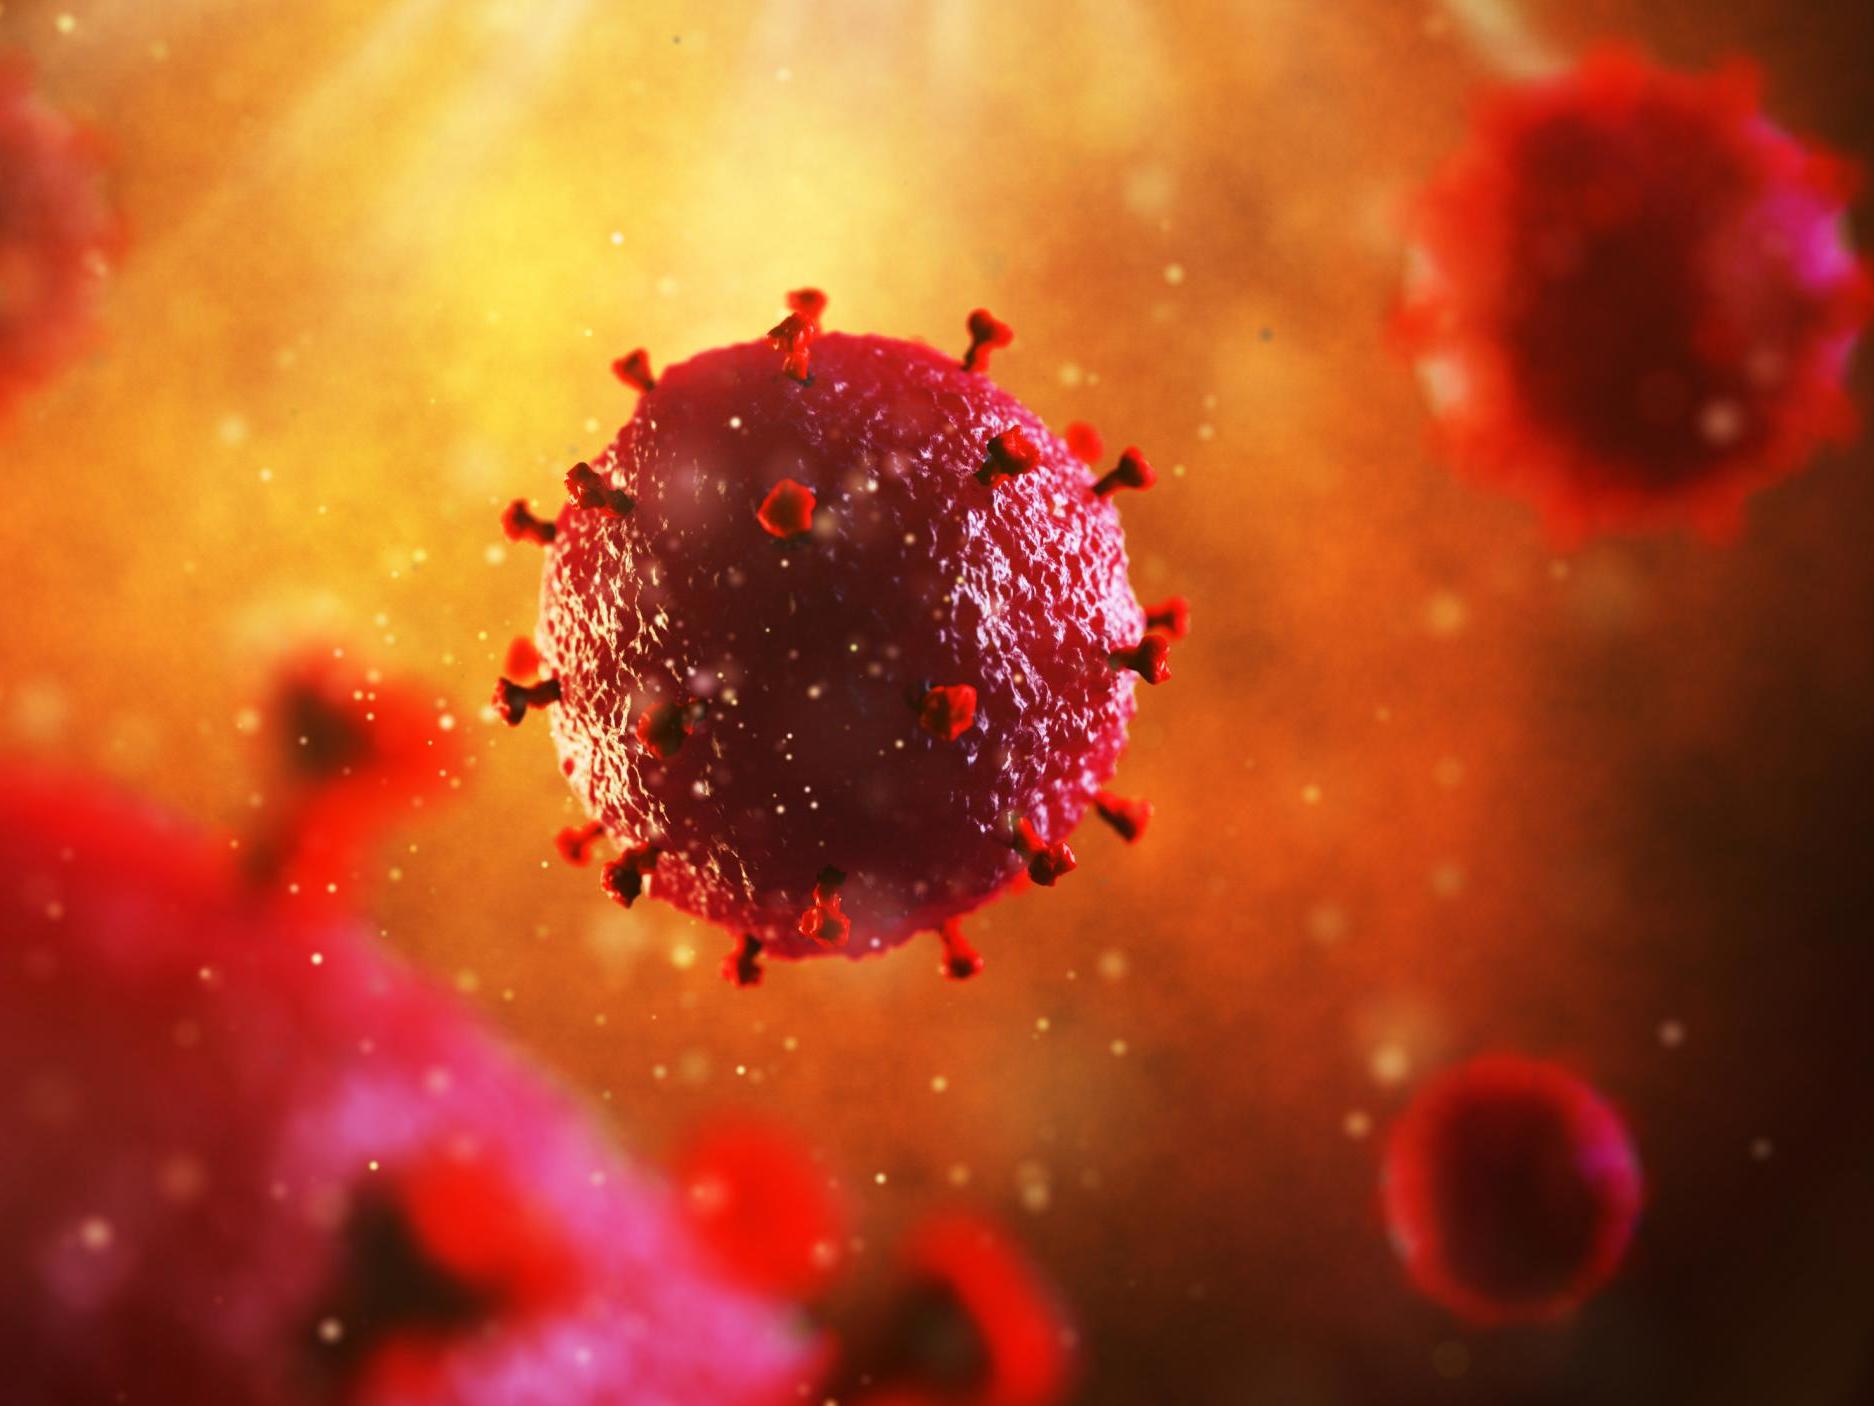 A second man may have been cured of HIV